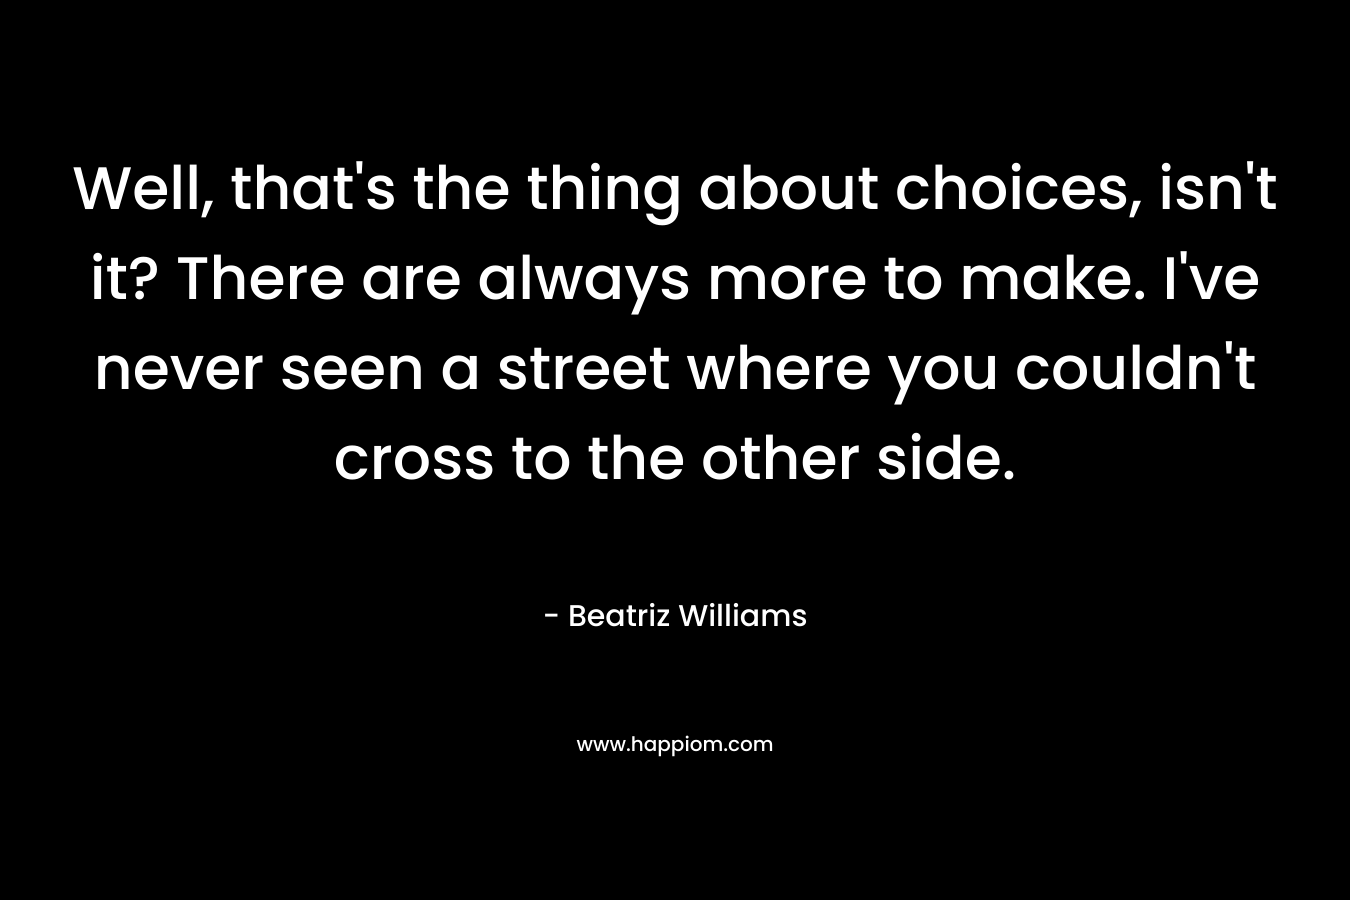 Well, that’s the thing about choices, isn’t it? There are always more to make. I’ve never seen a street where you couldn’t cross to the other side. – Beatriz Williams